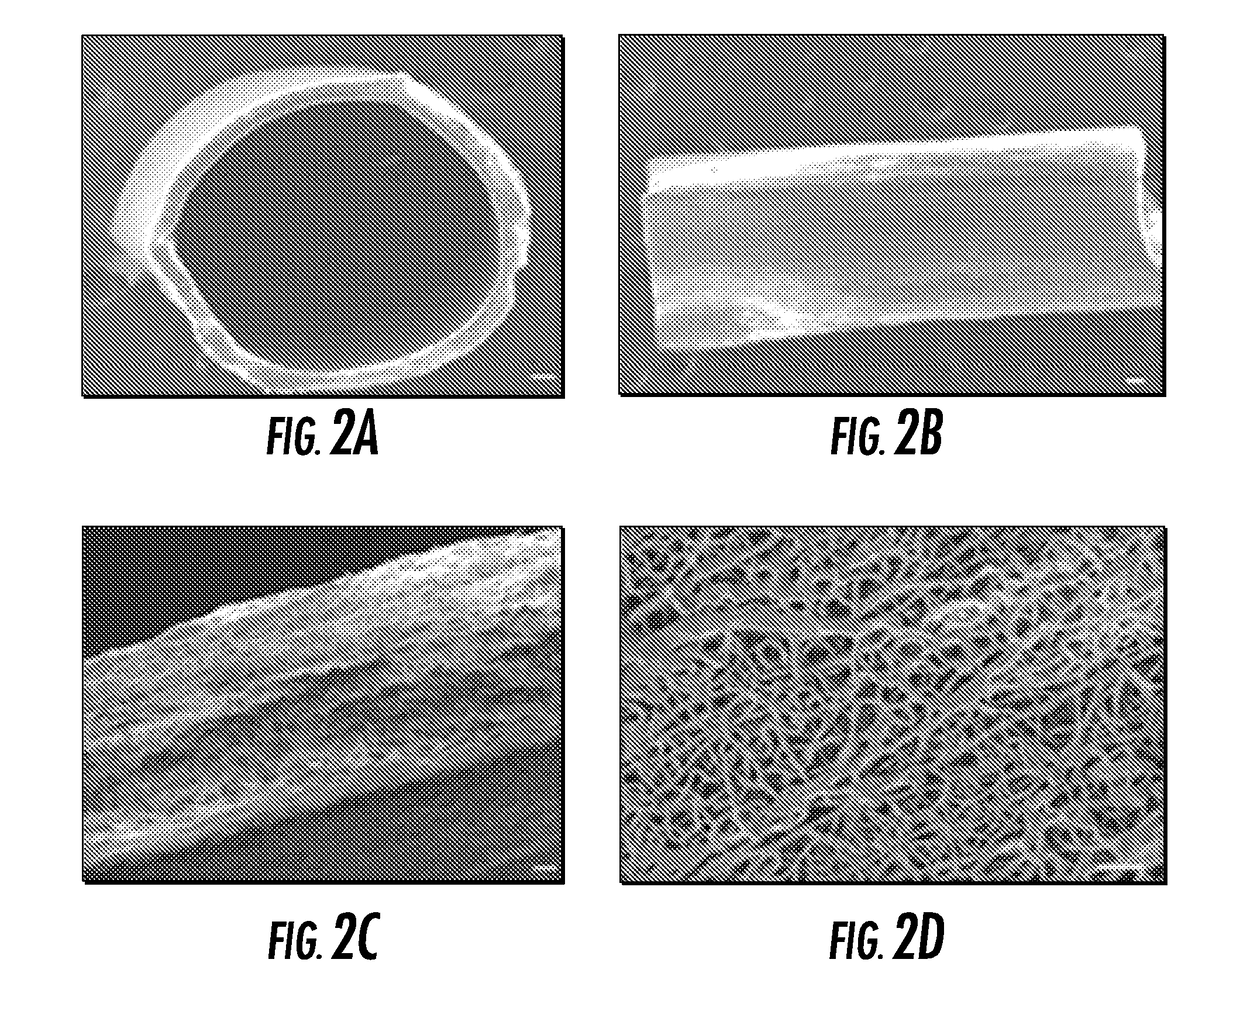 Device and method for a nanofiber wrap to minimize inflamation and scarring